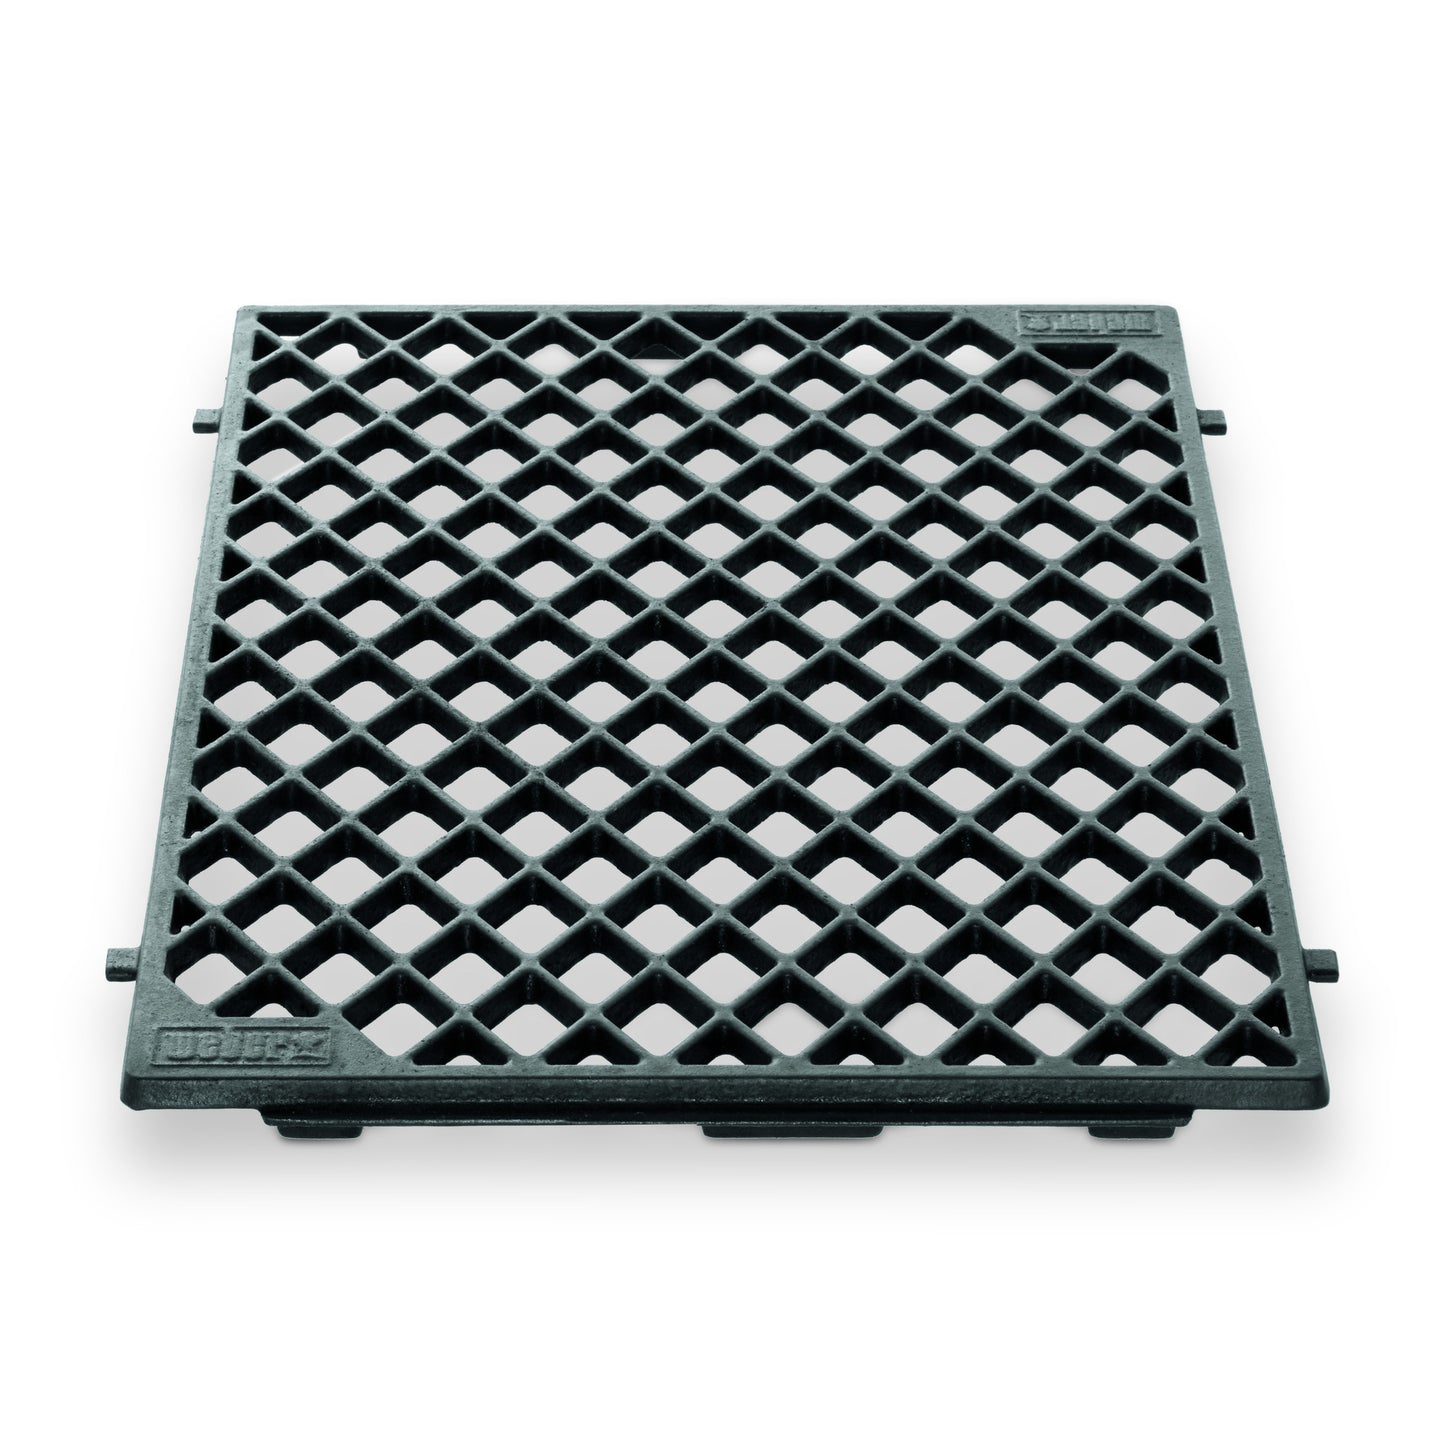 Weber 8854 Cast Iron Sear Grate | Available in-store and online with Barbecues Galore. Located in Burlington, Oakville, Etobicoke & Calgary, Alberta. Stop by for all of your Bbq, accessory, patio, cover and parts needs.